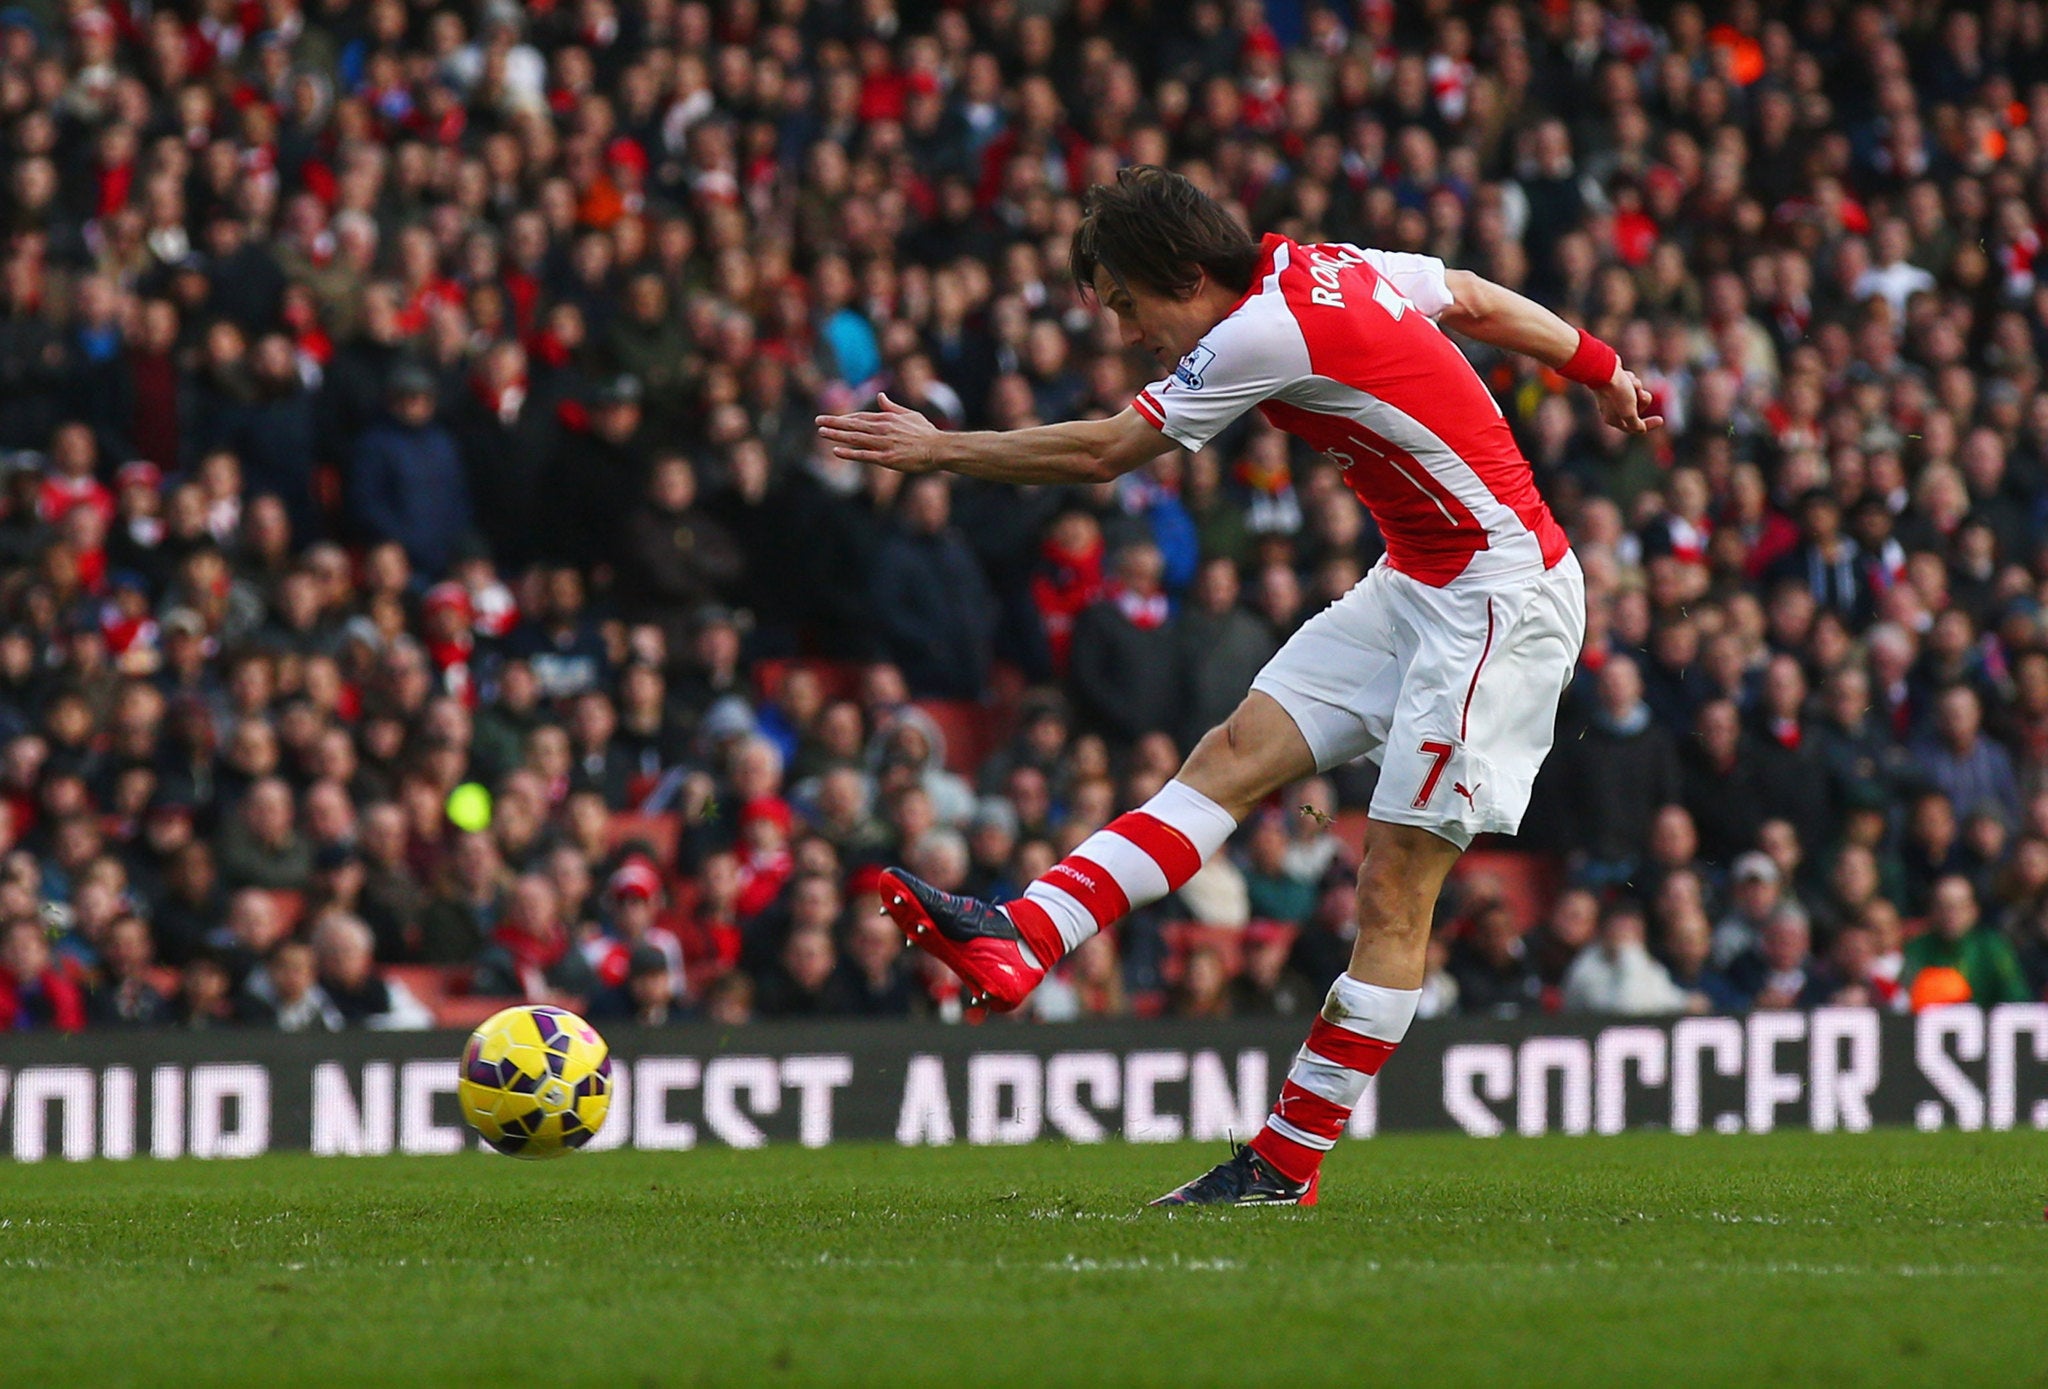 Tomas Rosicky seals the win with a deflected strike